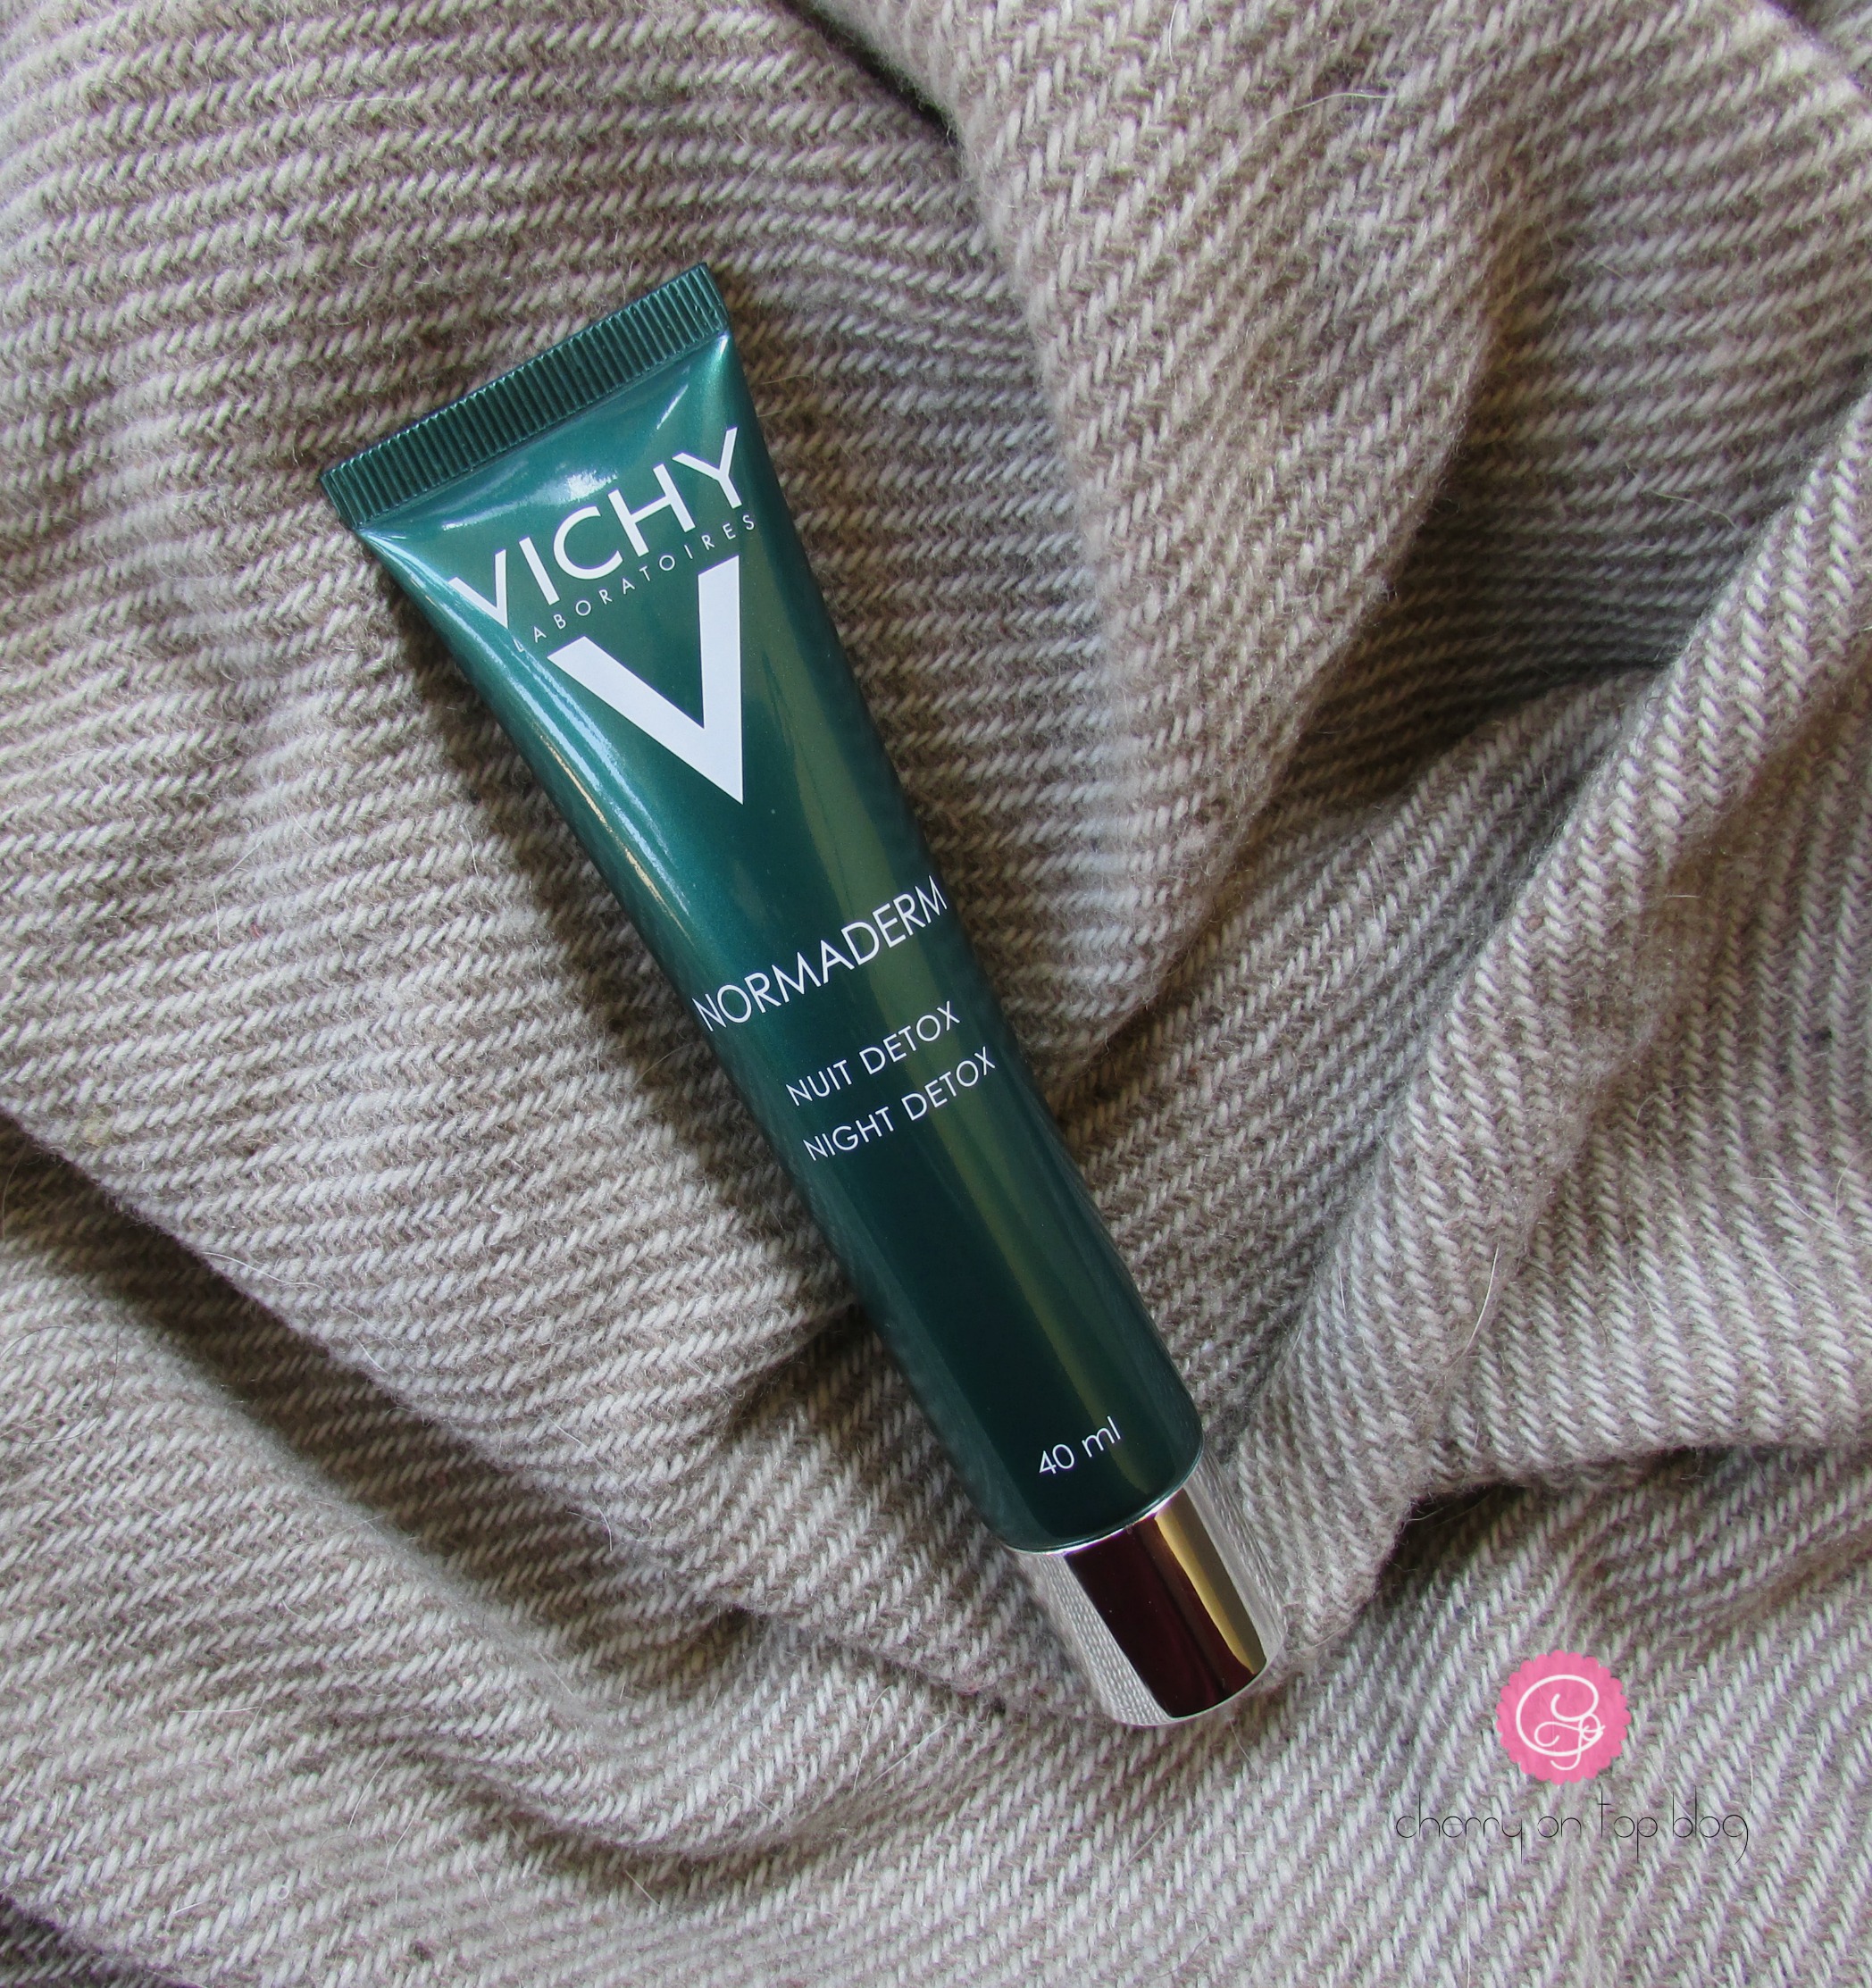 Vichy Normaderm Night Detox Review | Cherry On Top